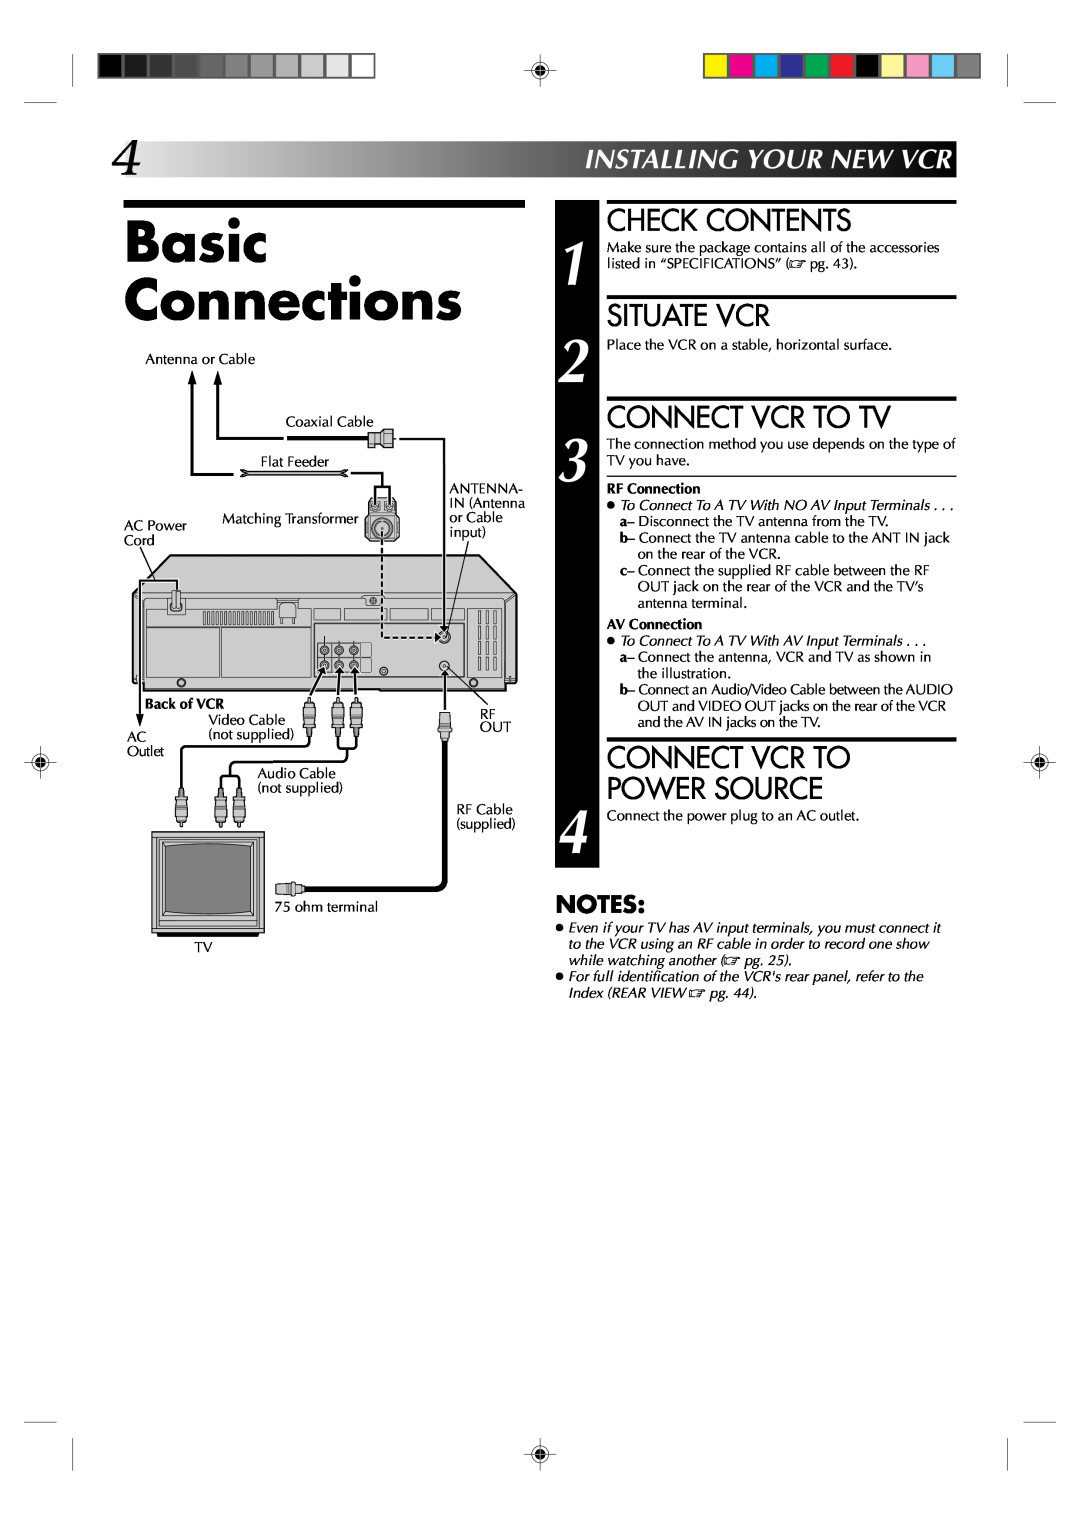 JVC HR-J631T Basic Connections, Check Contents, Situate Vcr, Connect Vcr To Tv, Connect Vcr To Power Source, Back of VCR 